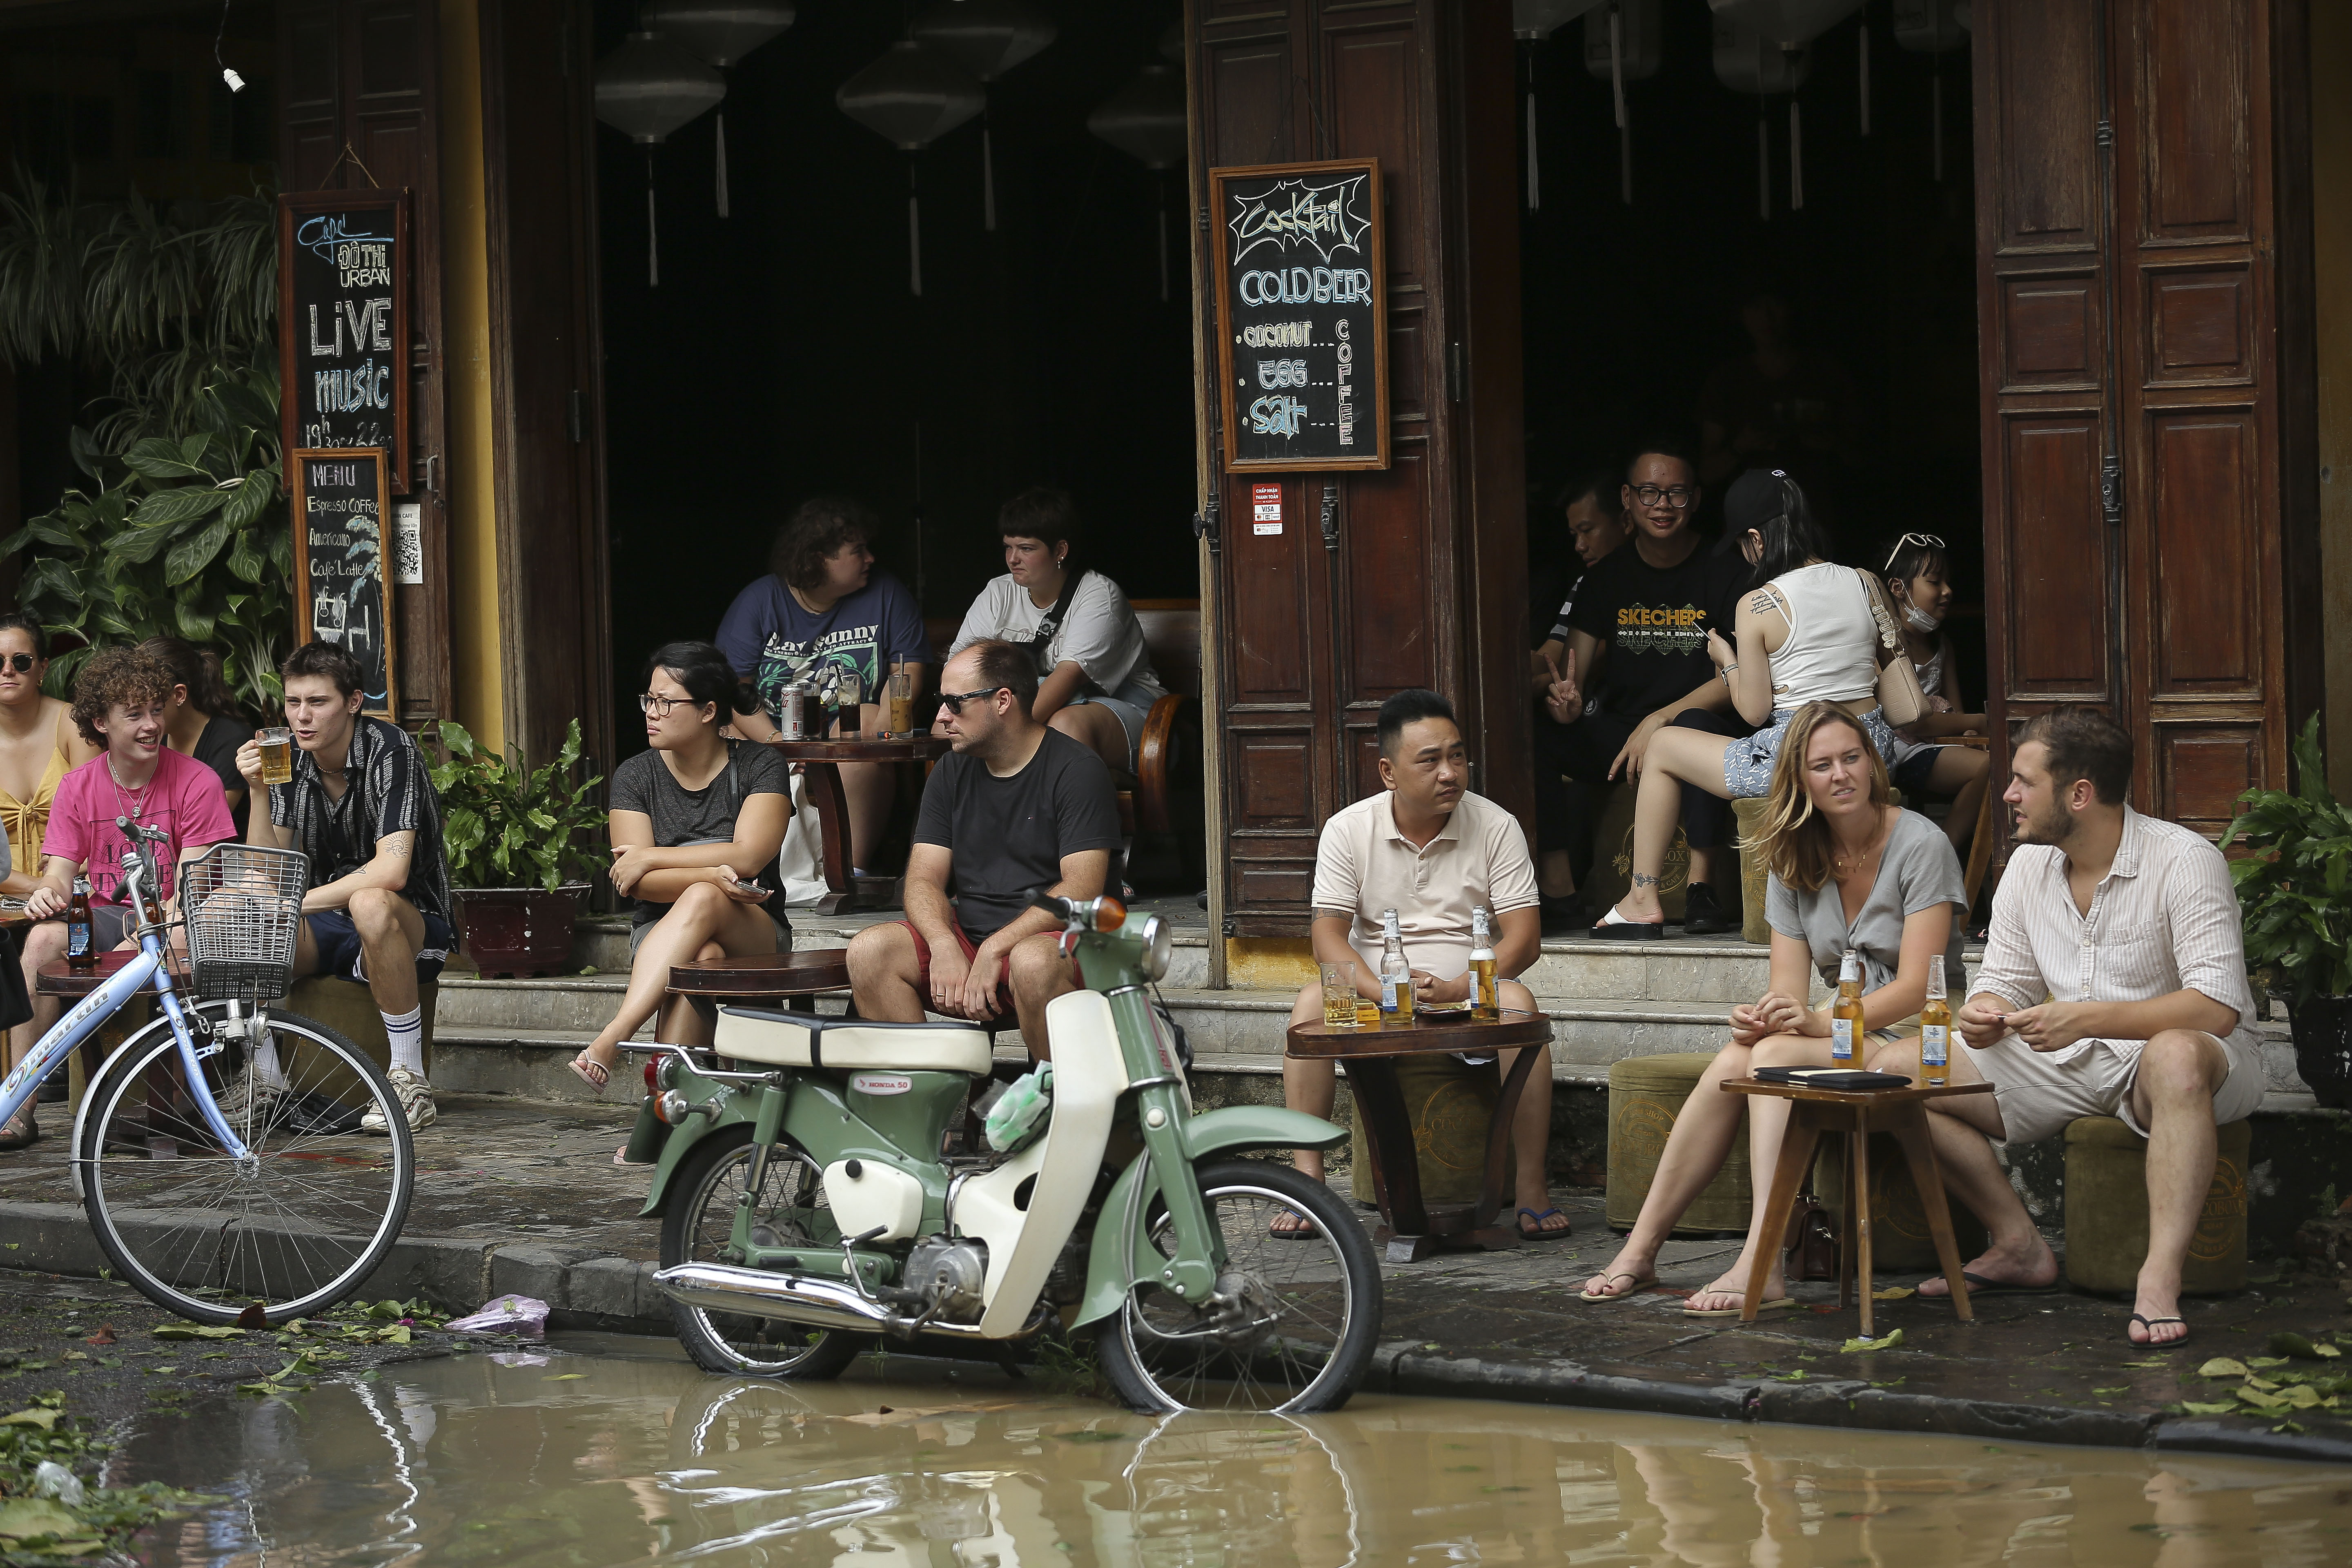 Coffee shops near flooded roads attract large numbers of foreign tourists.